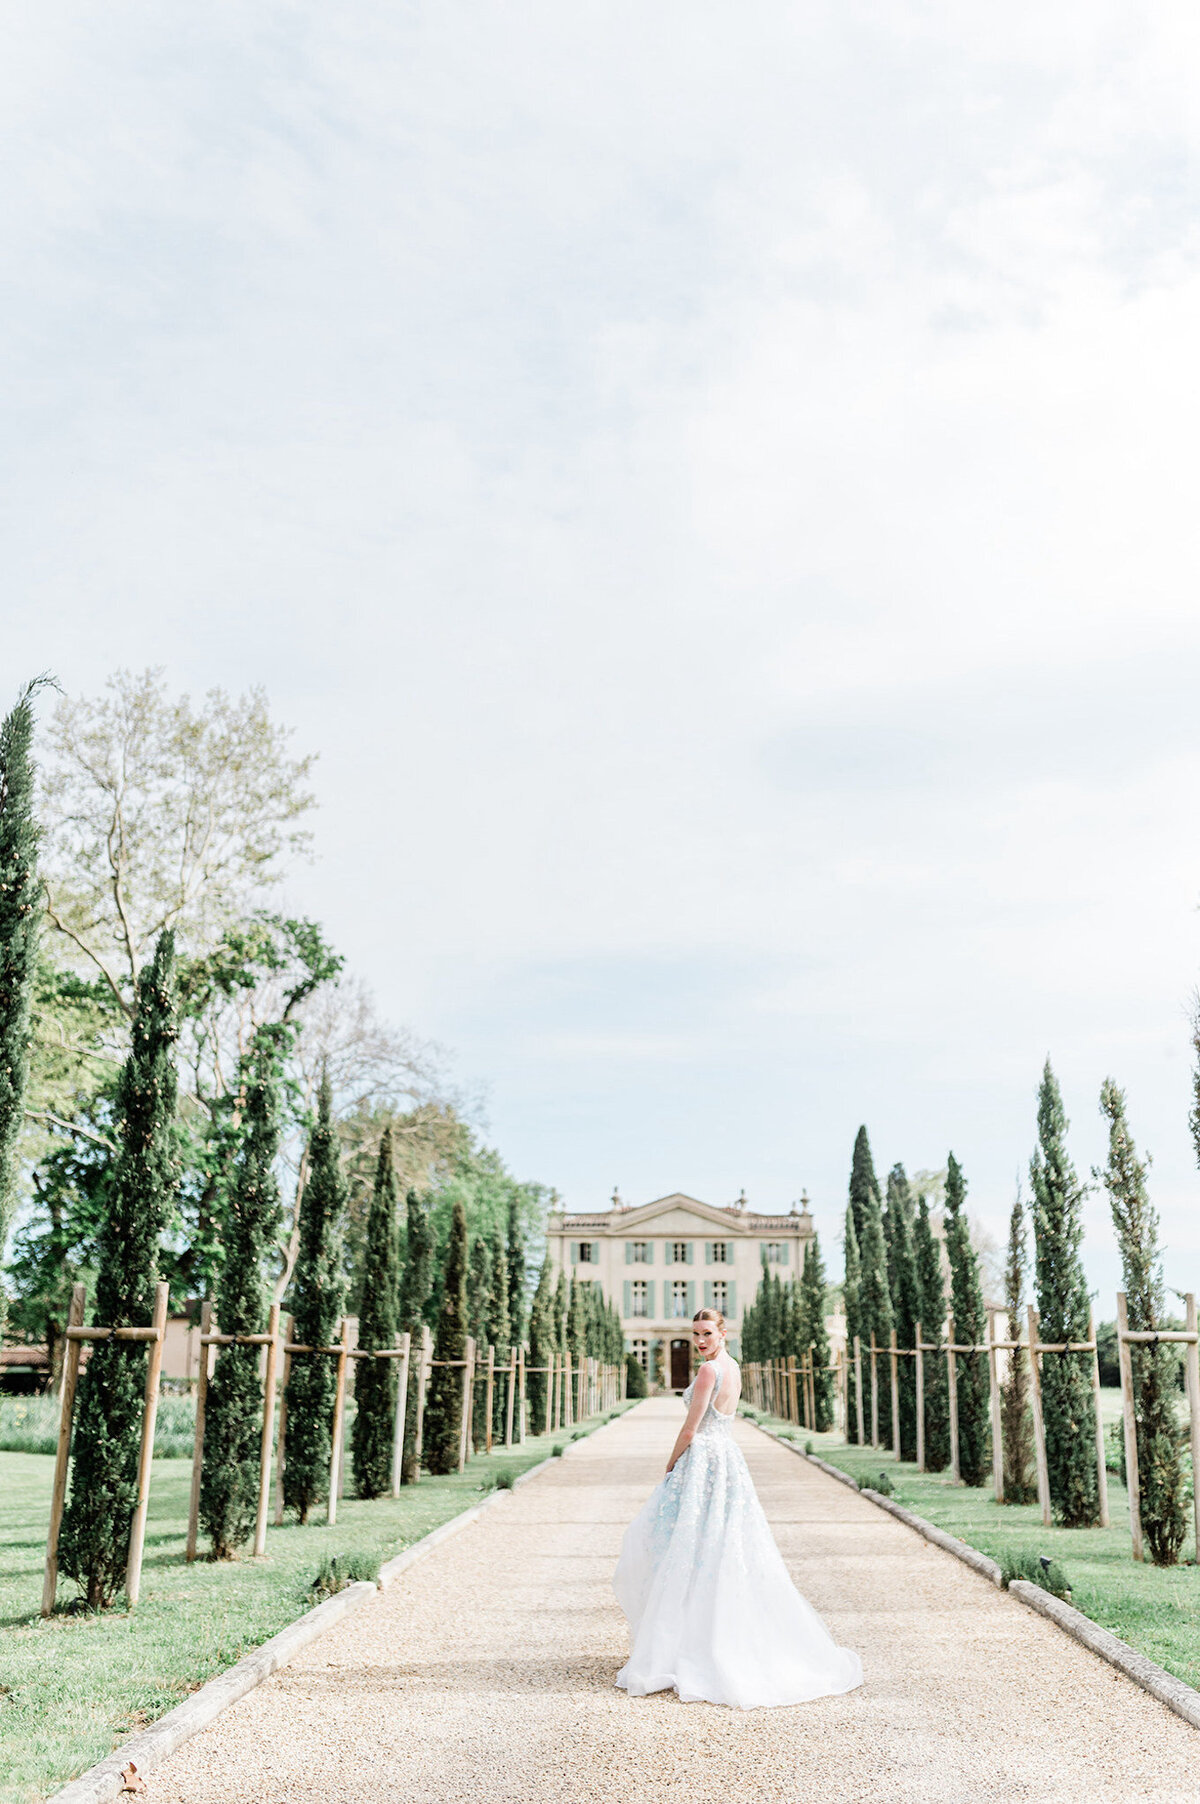 Cherish the intimate moments of your wedding celebration in the South of France with our luxury services. Our fine art lens transforms your journey into a visual story, capturing the delicate details and emotions that define your connection, against the backdrop of Château de Tourreau's splendor.